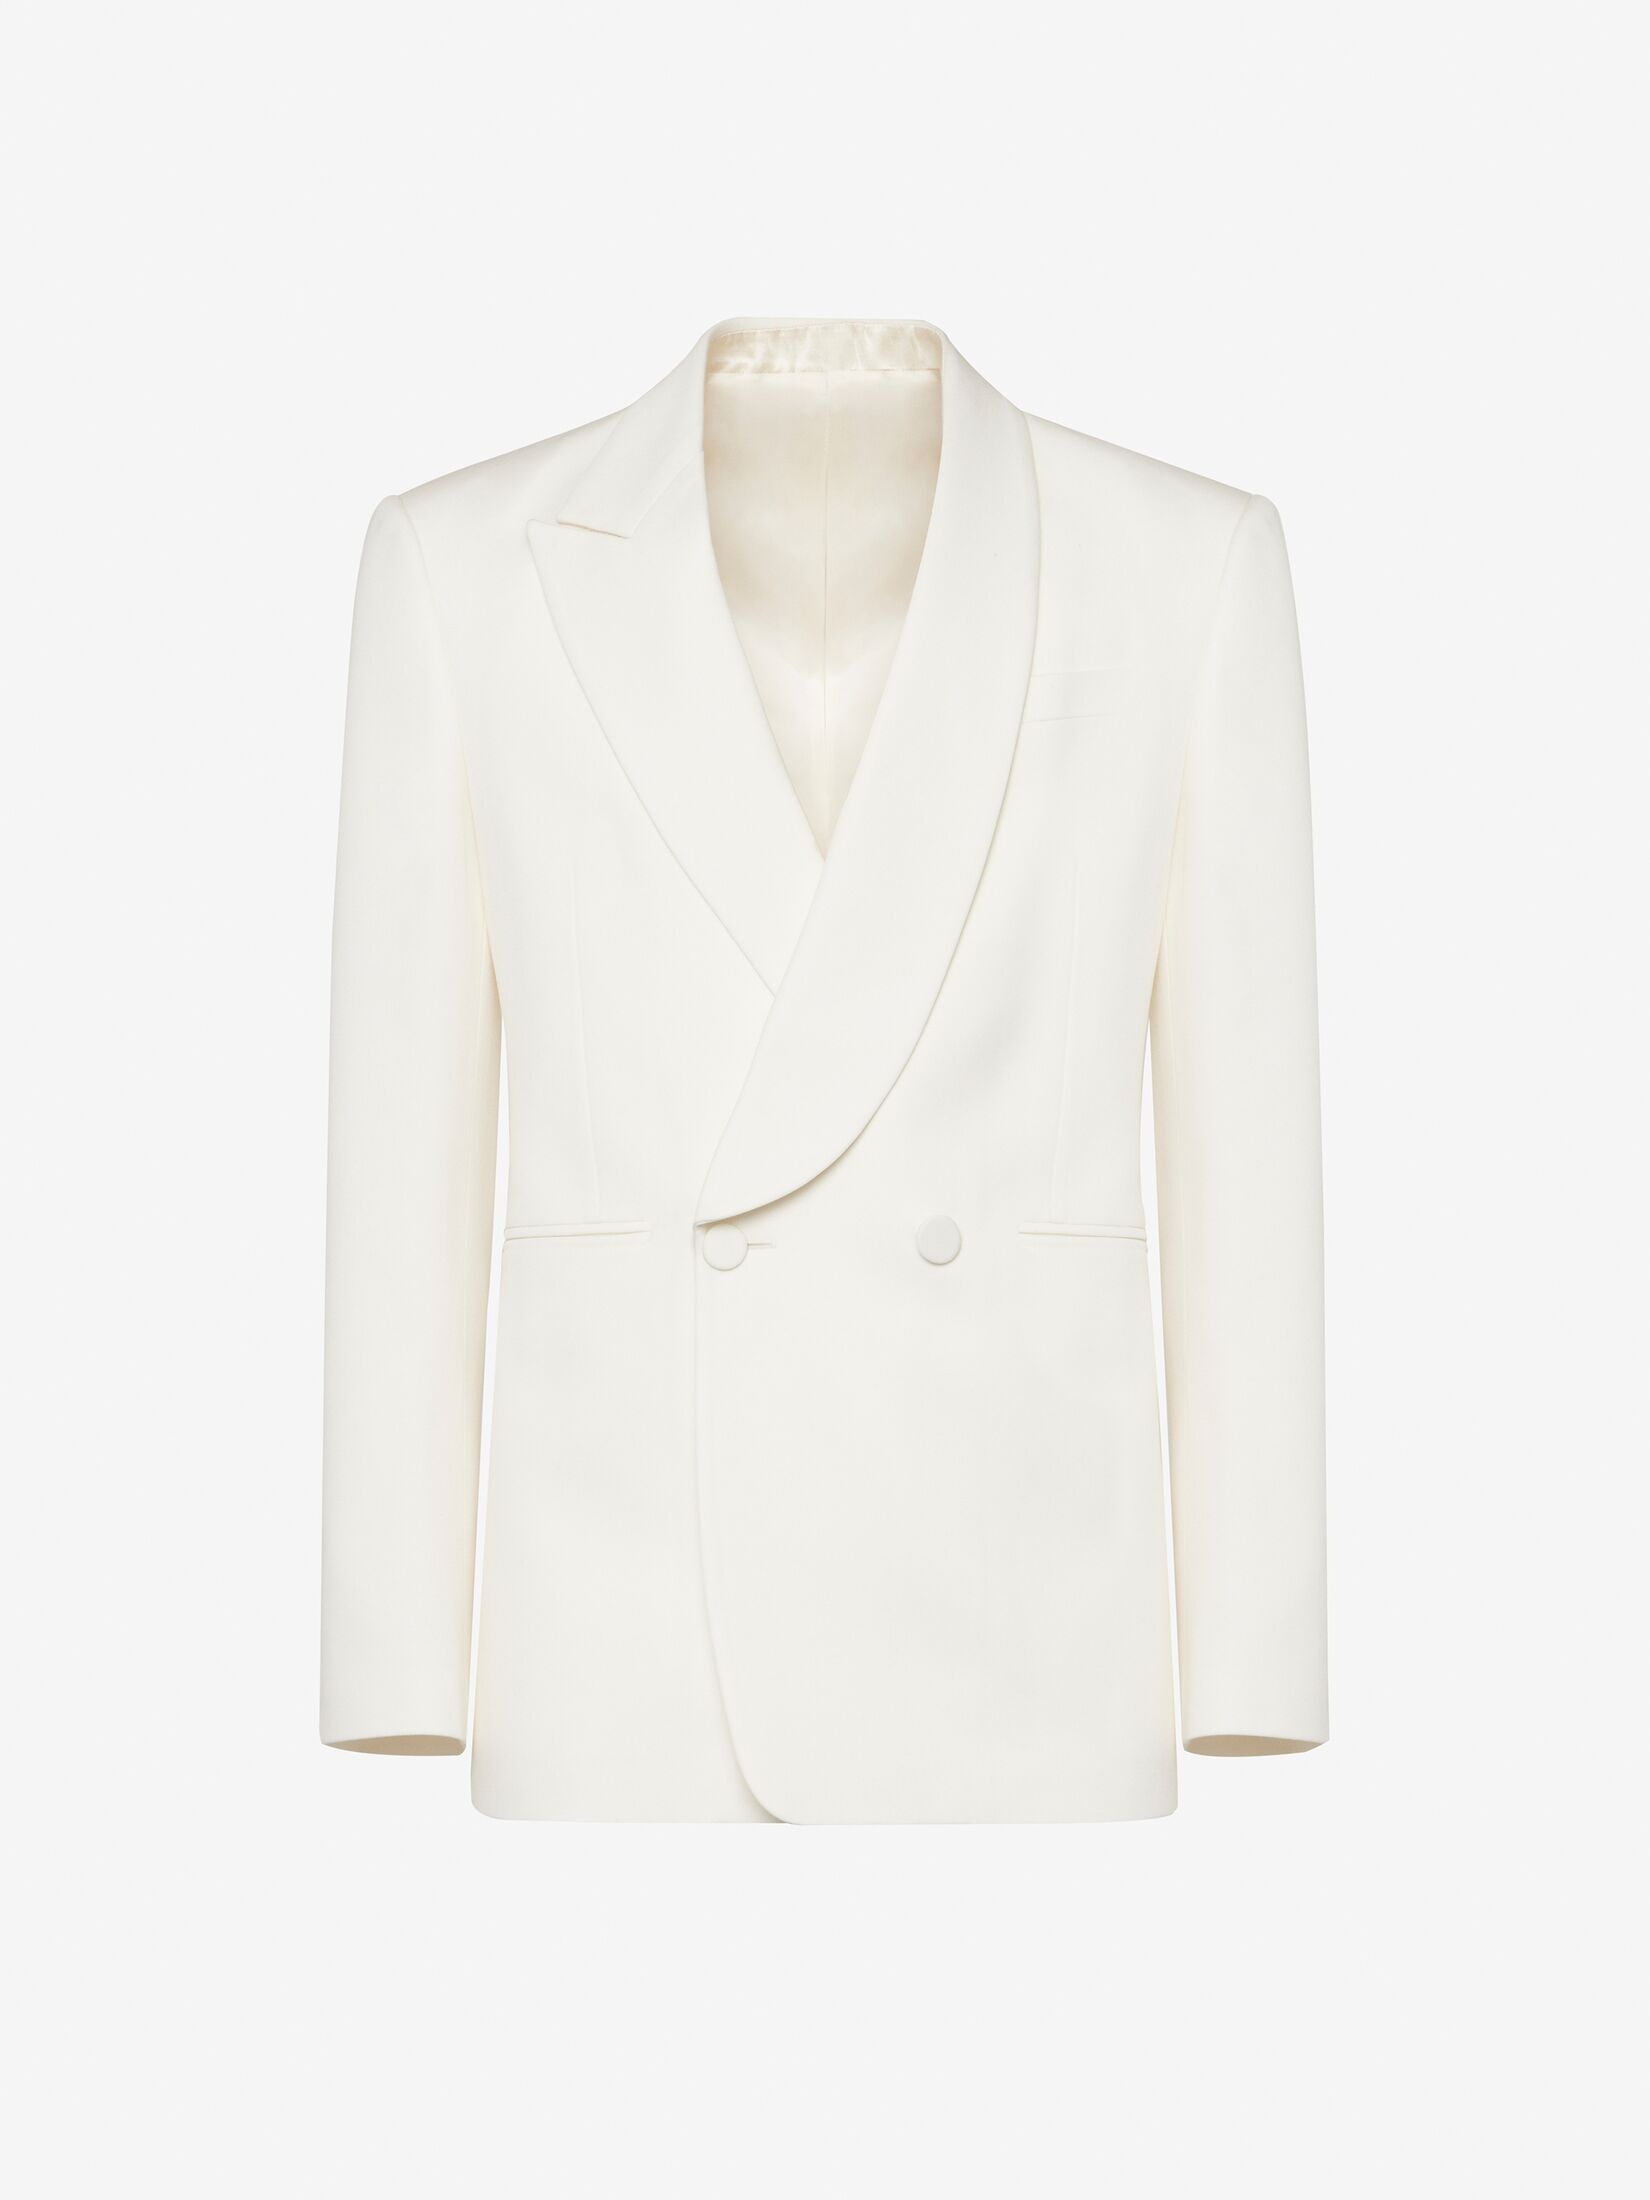 Men's Half Shawl Collar Double-breasted Jacket in Soft White - 1